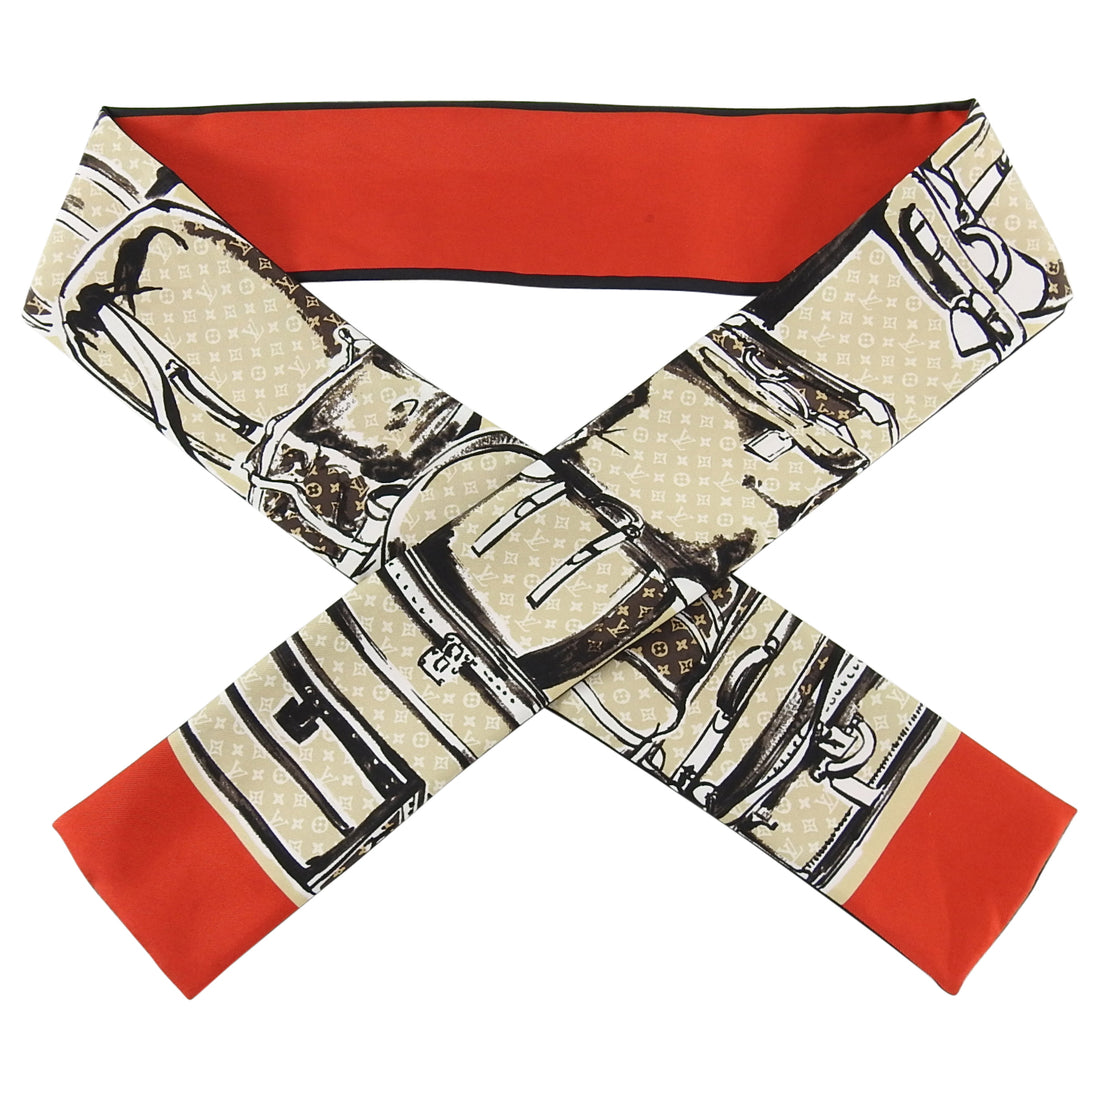 Louis Vuitton Red and Beige Monogram Trunks Silk Bandeau Scarf – I MISS YOU  VINTAGE